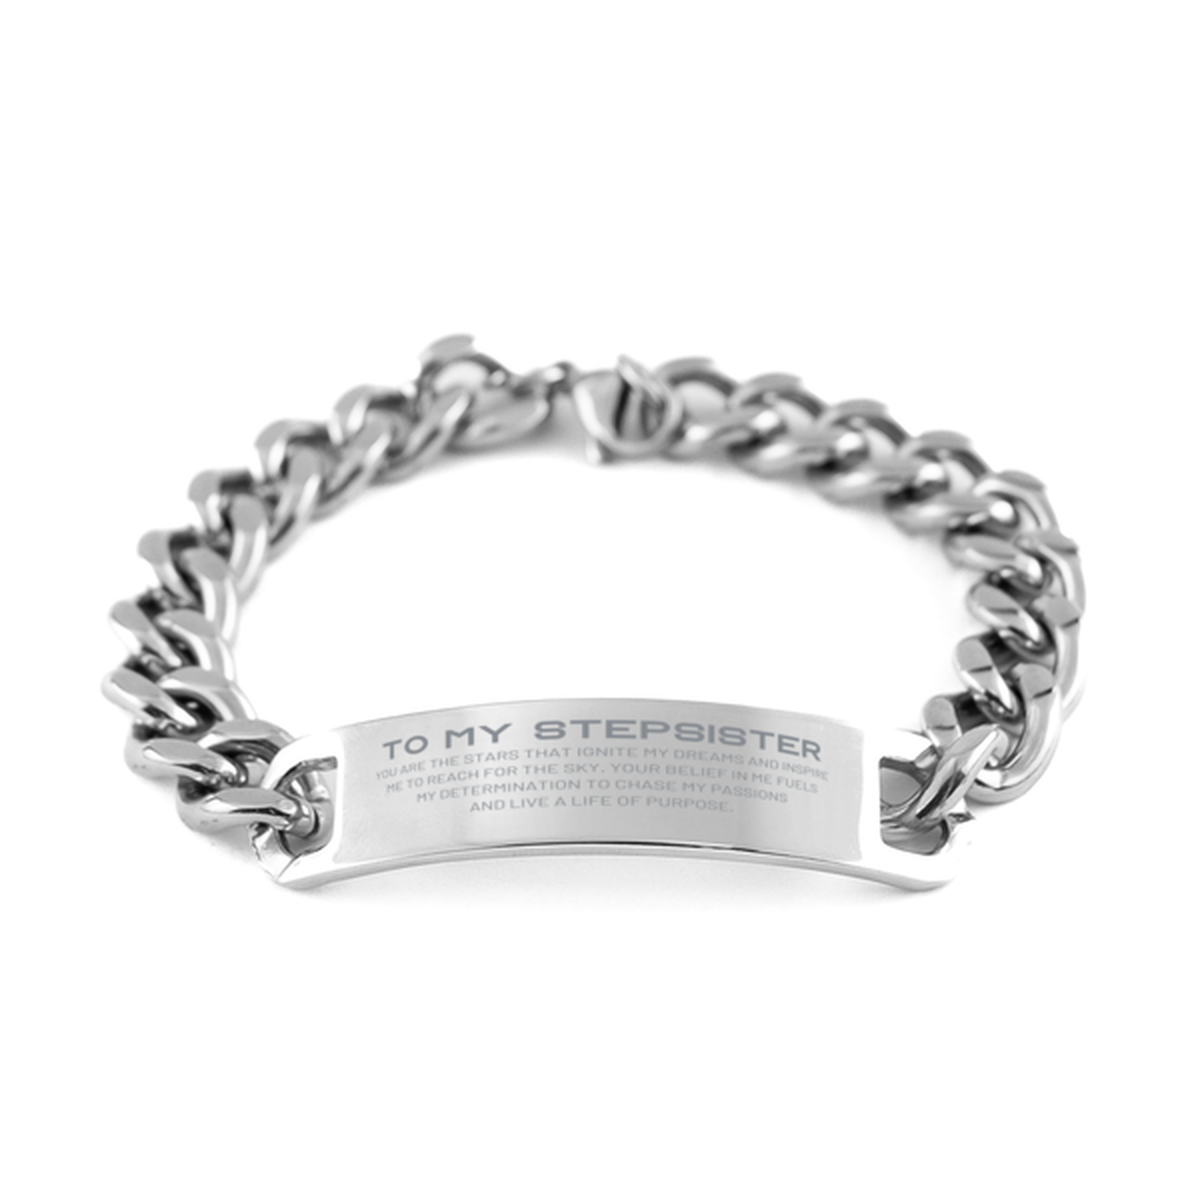 To My Stepsister Cuban Chain Stainless Steel Bracelet, You are the stars that ignite my dreams and inspire me to reach for the sky, Birthday Unique Gifts For Stepsister, Thank You Gifts For Stepsister